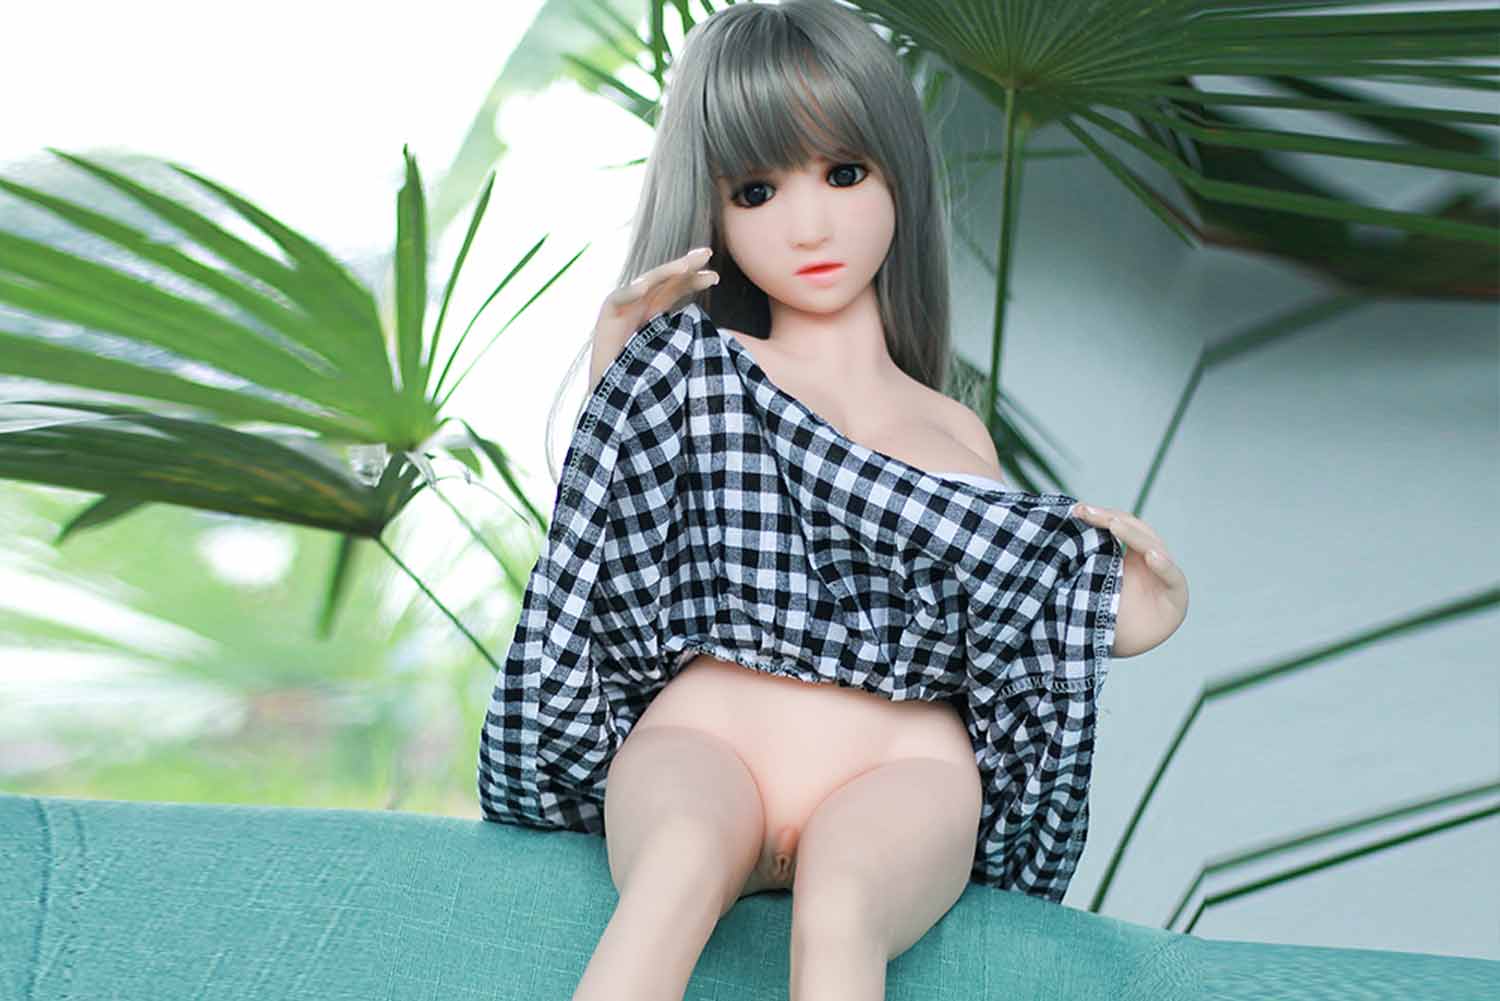 A mini sex doll with a skirt and a vagina